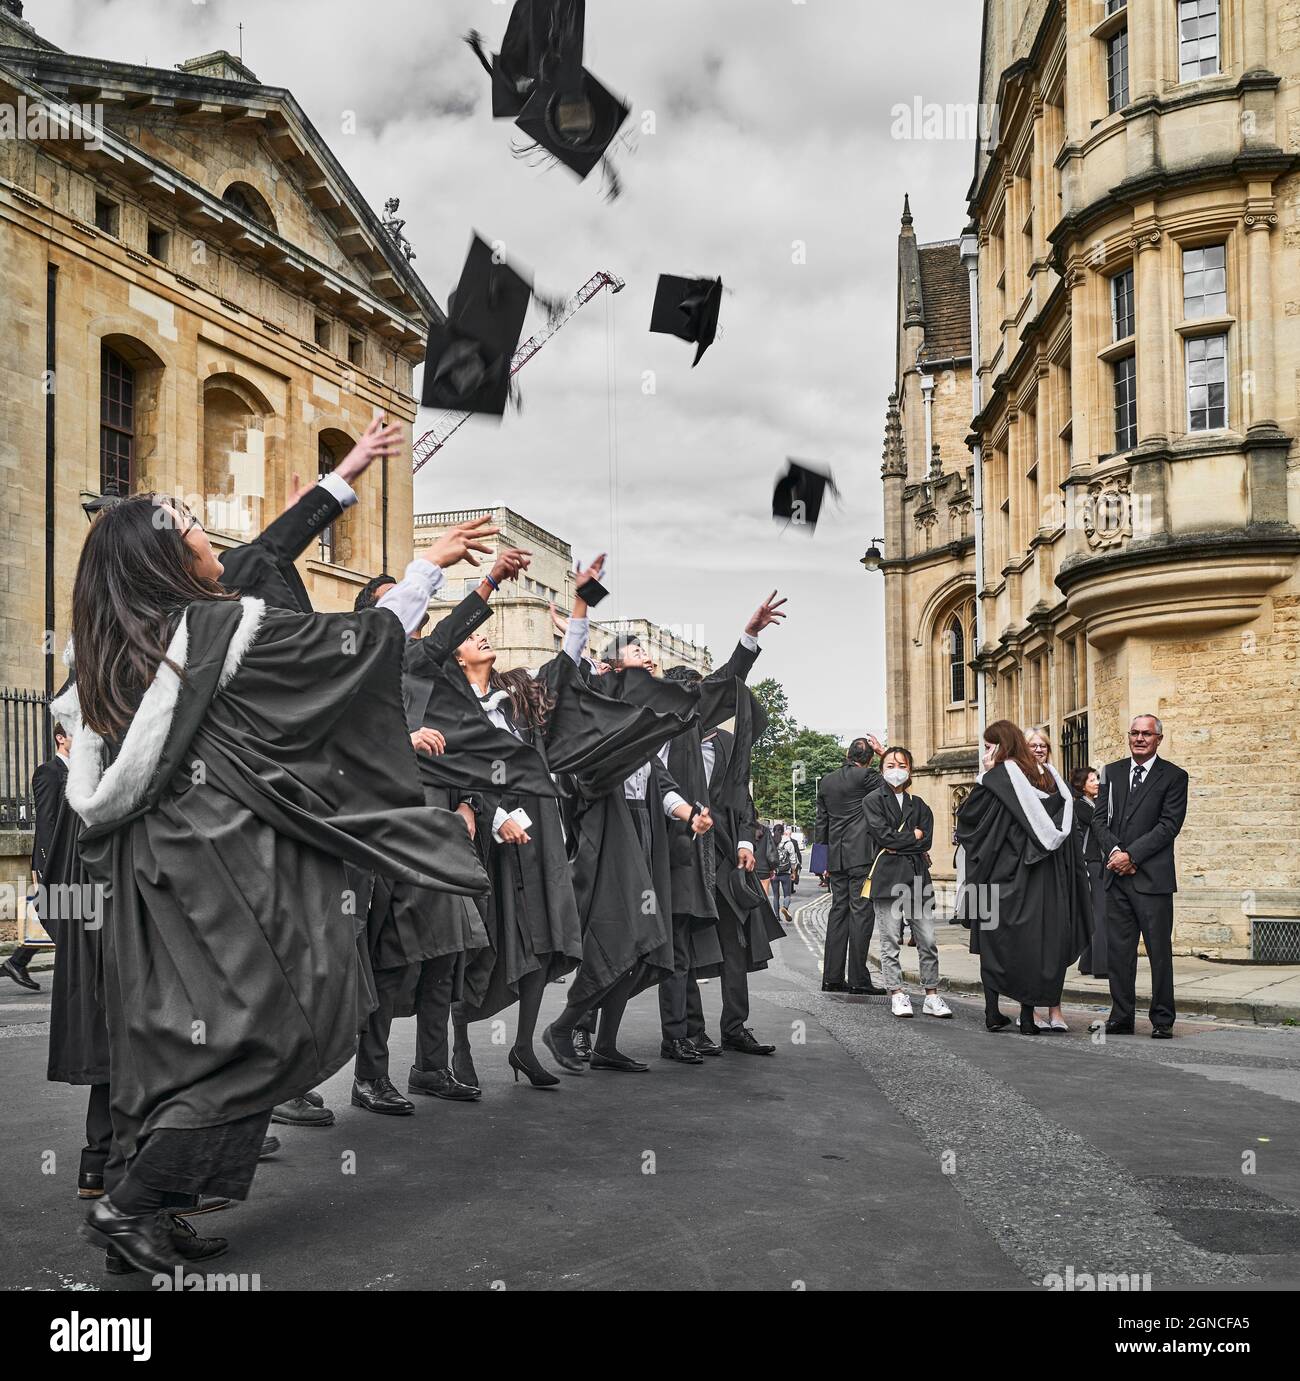 Graduate students of the university of Oxford, England, celebrate after